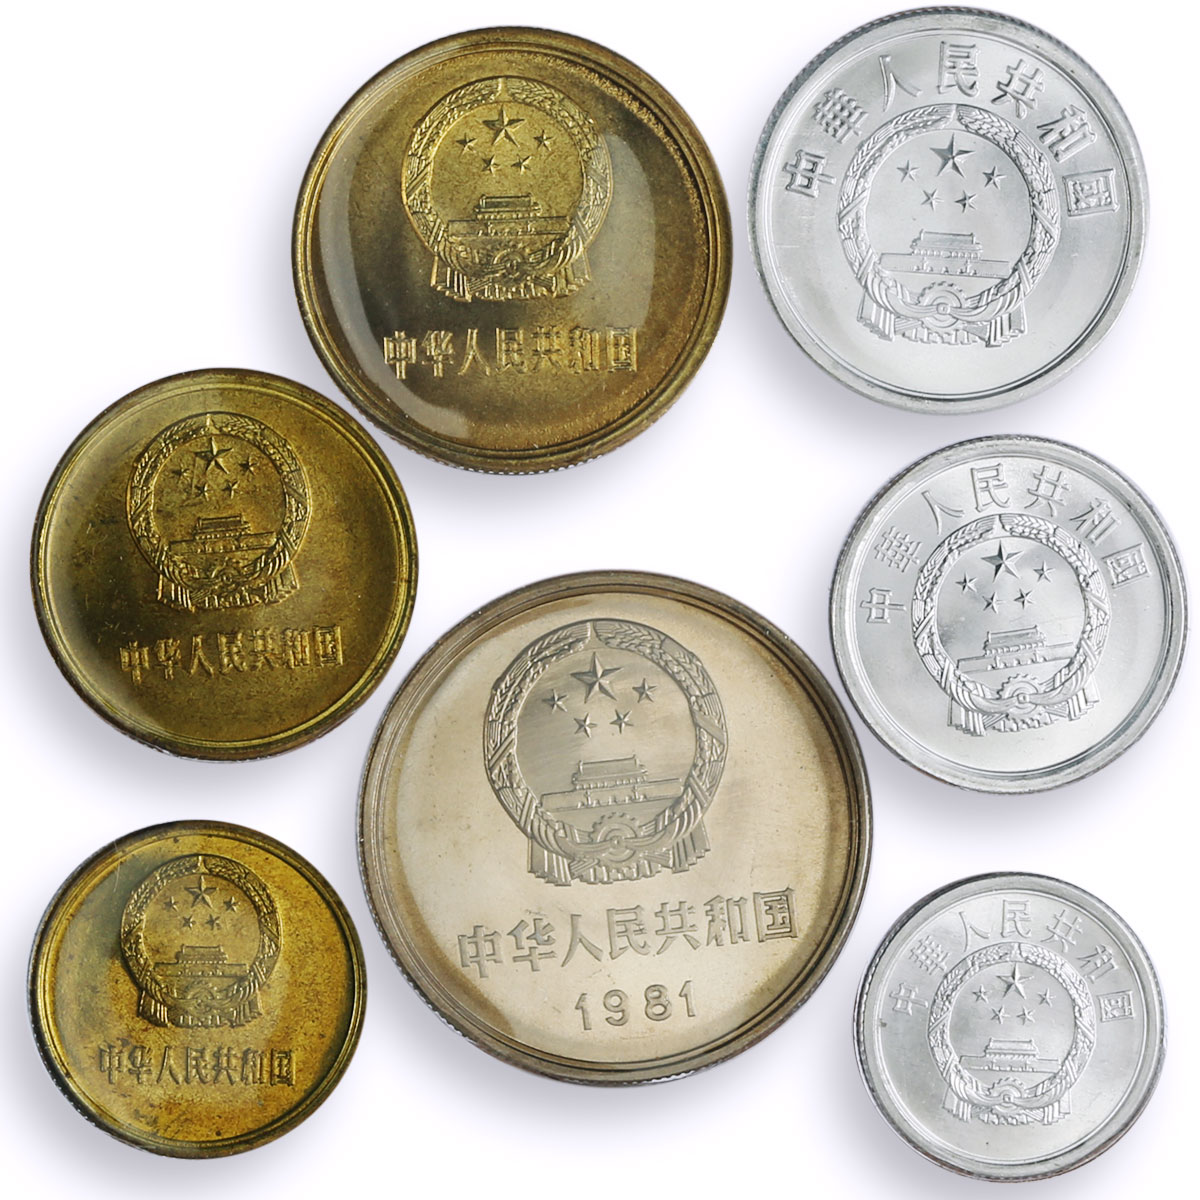 China set of 7 coins Republic Regular Coinage Commemorative CuNi coins 1981 - 82